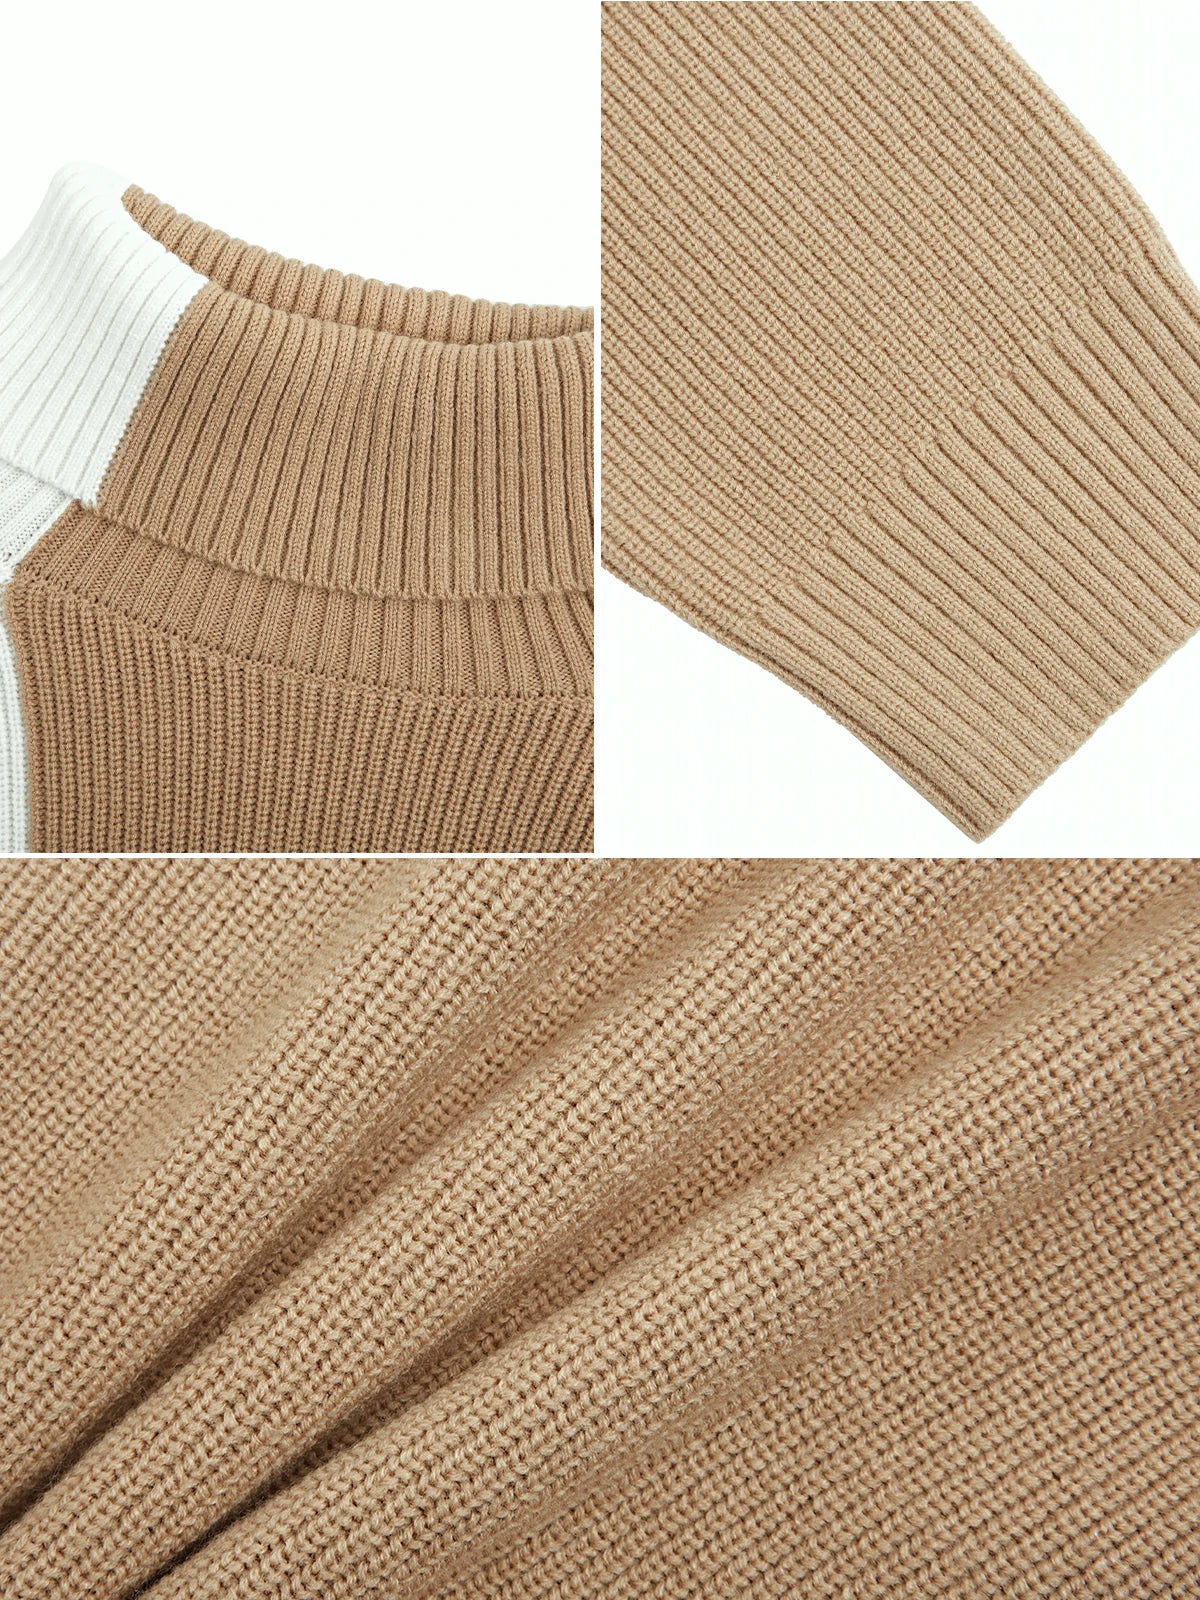 Trendy brown and white knit for a fashionable winter